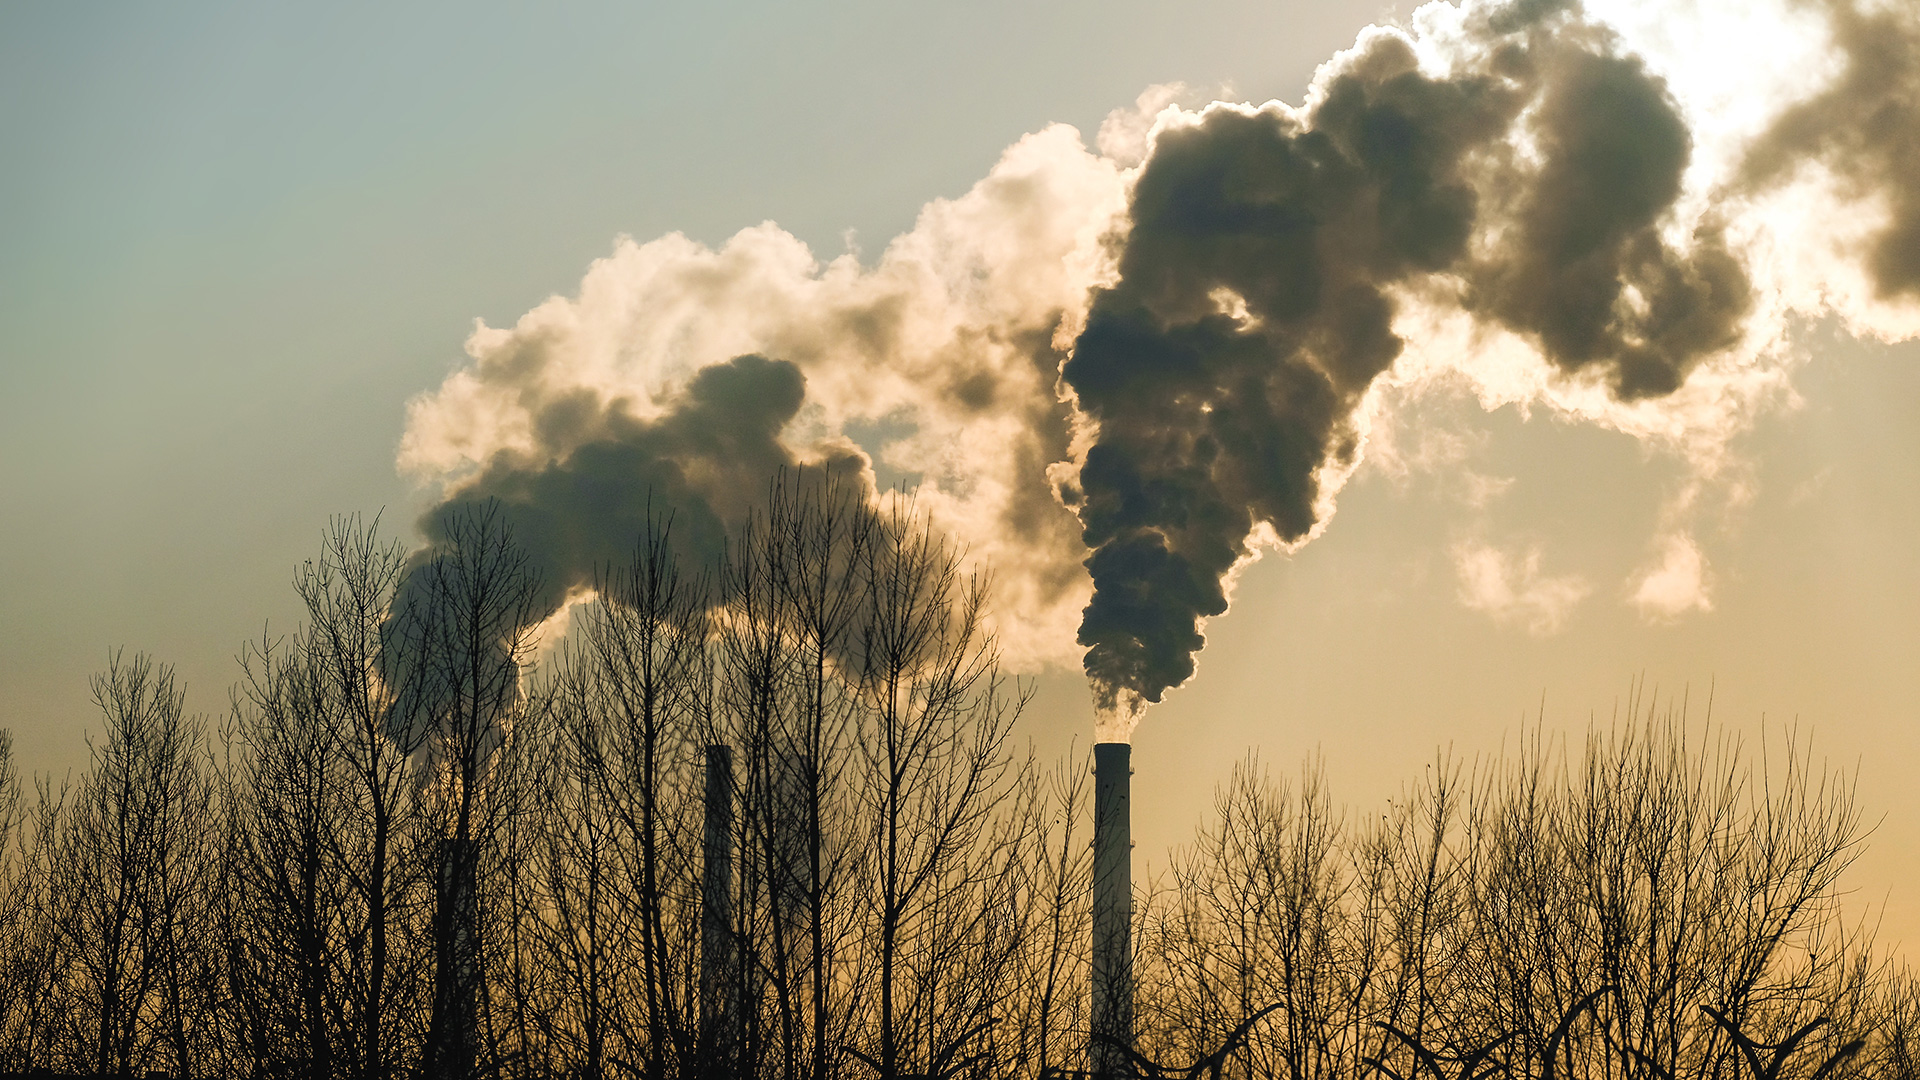 Can you claim a carbon credit for shutting down due to the pandemic?